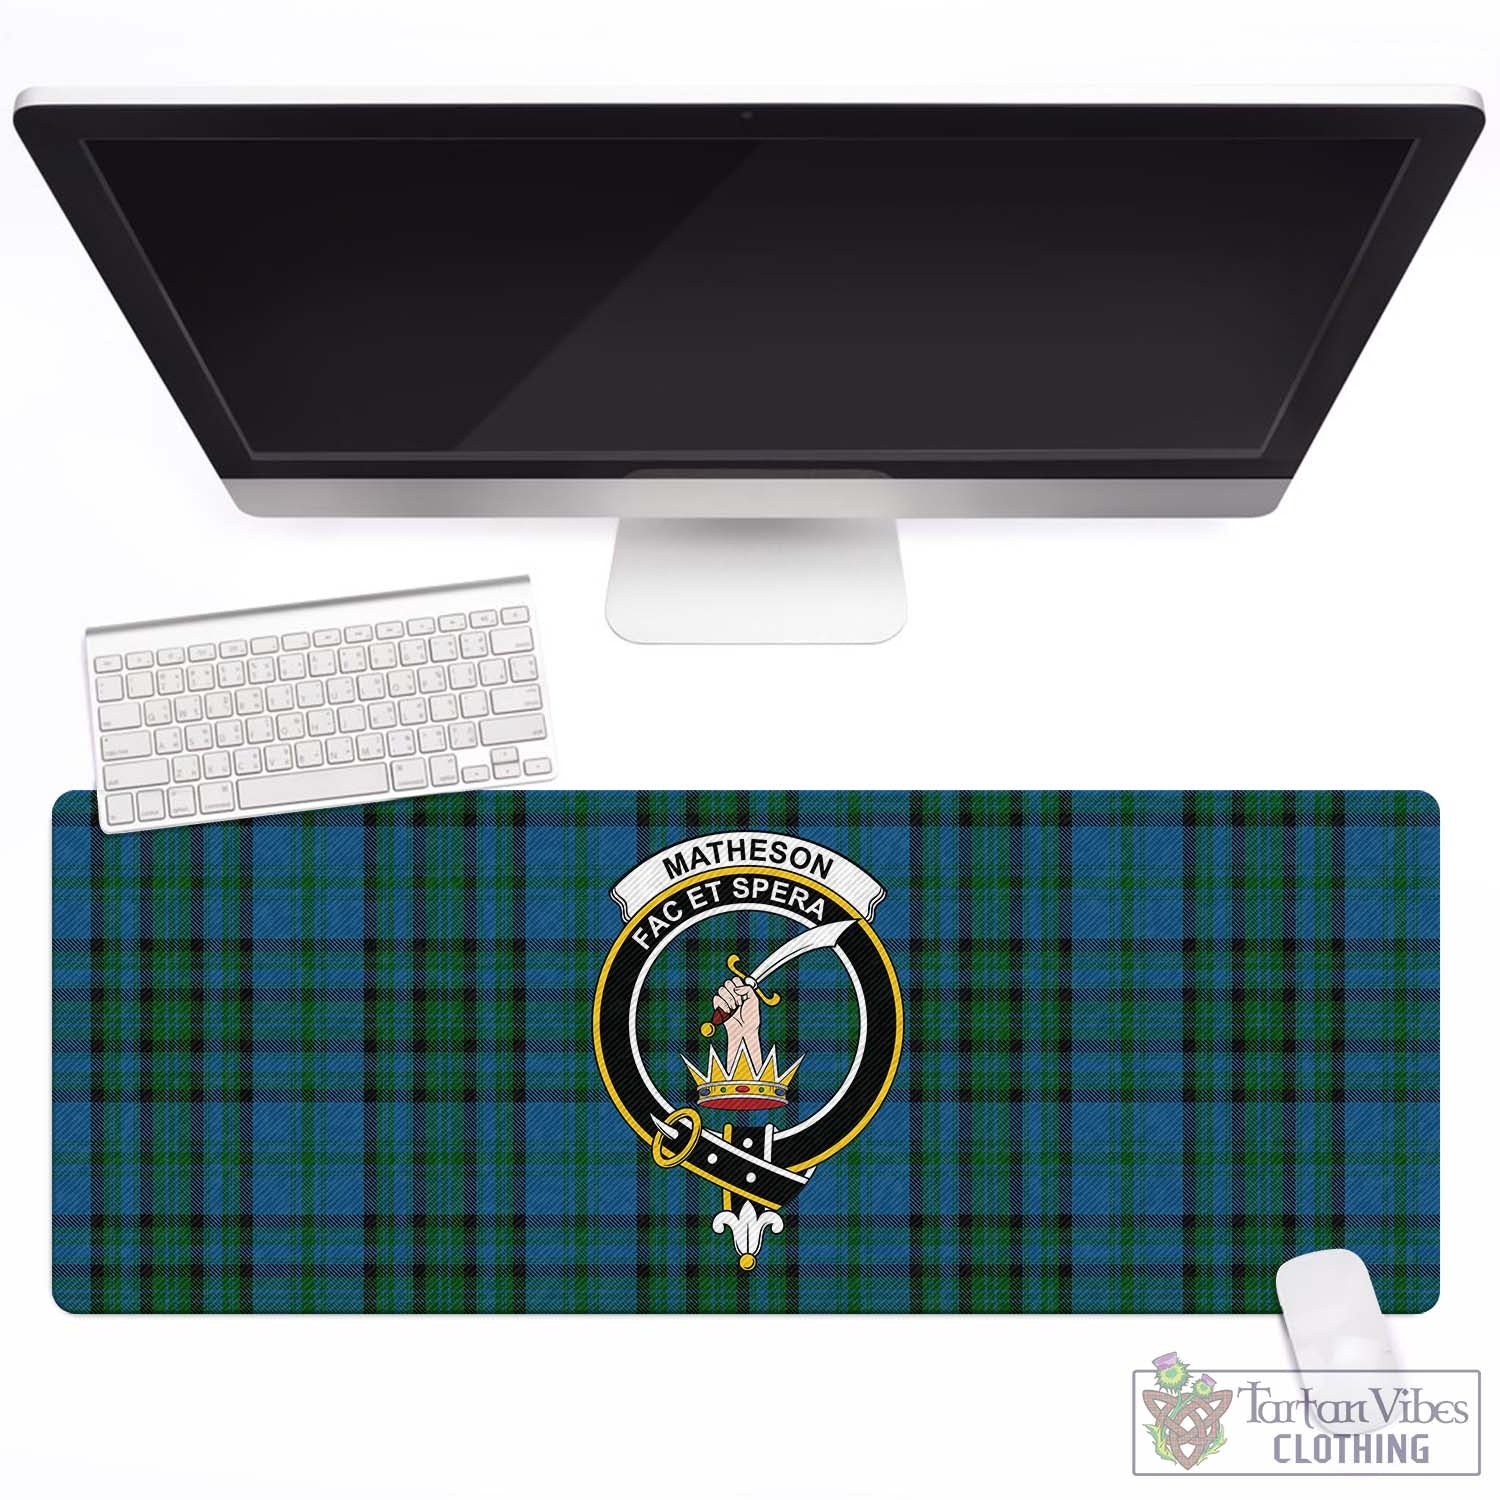 Tartan Vibes Clothing Matheson Hunting Tartan Mouse Pad with Family Crest